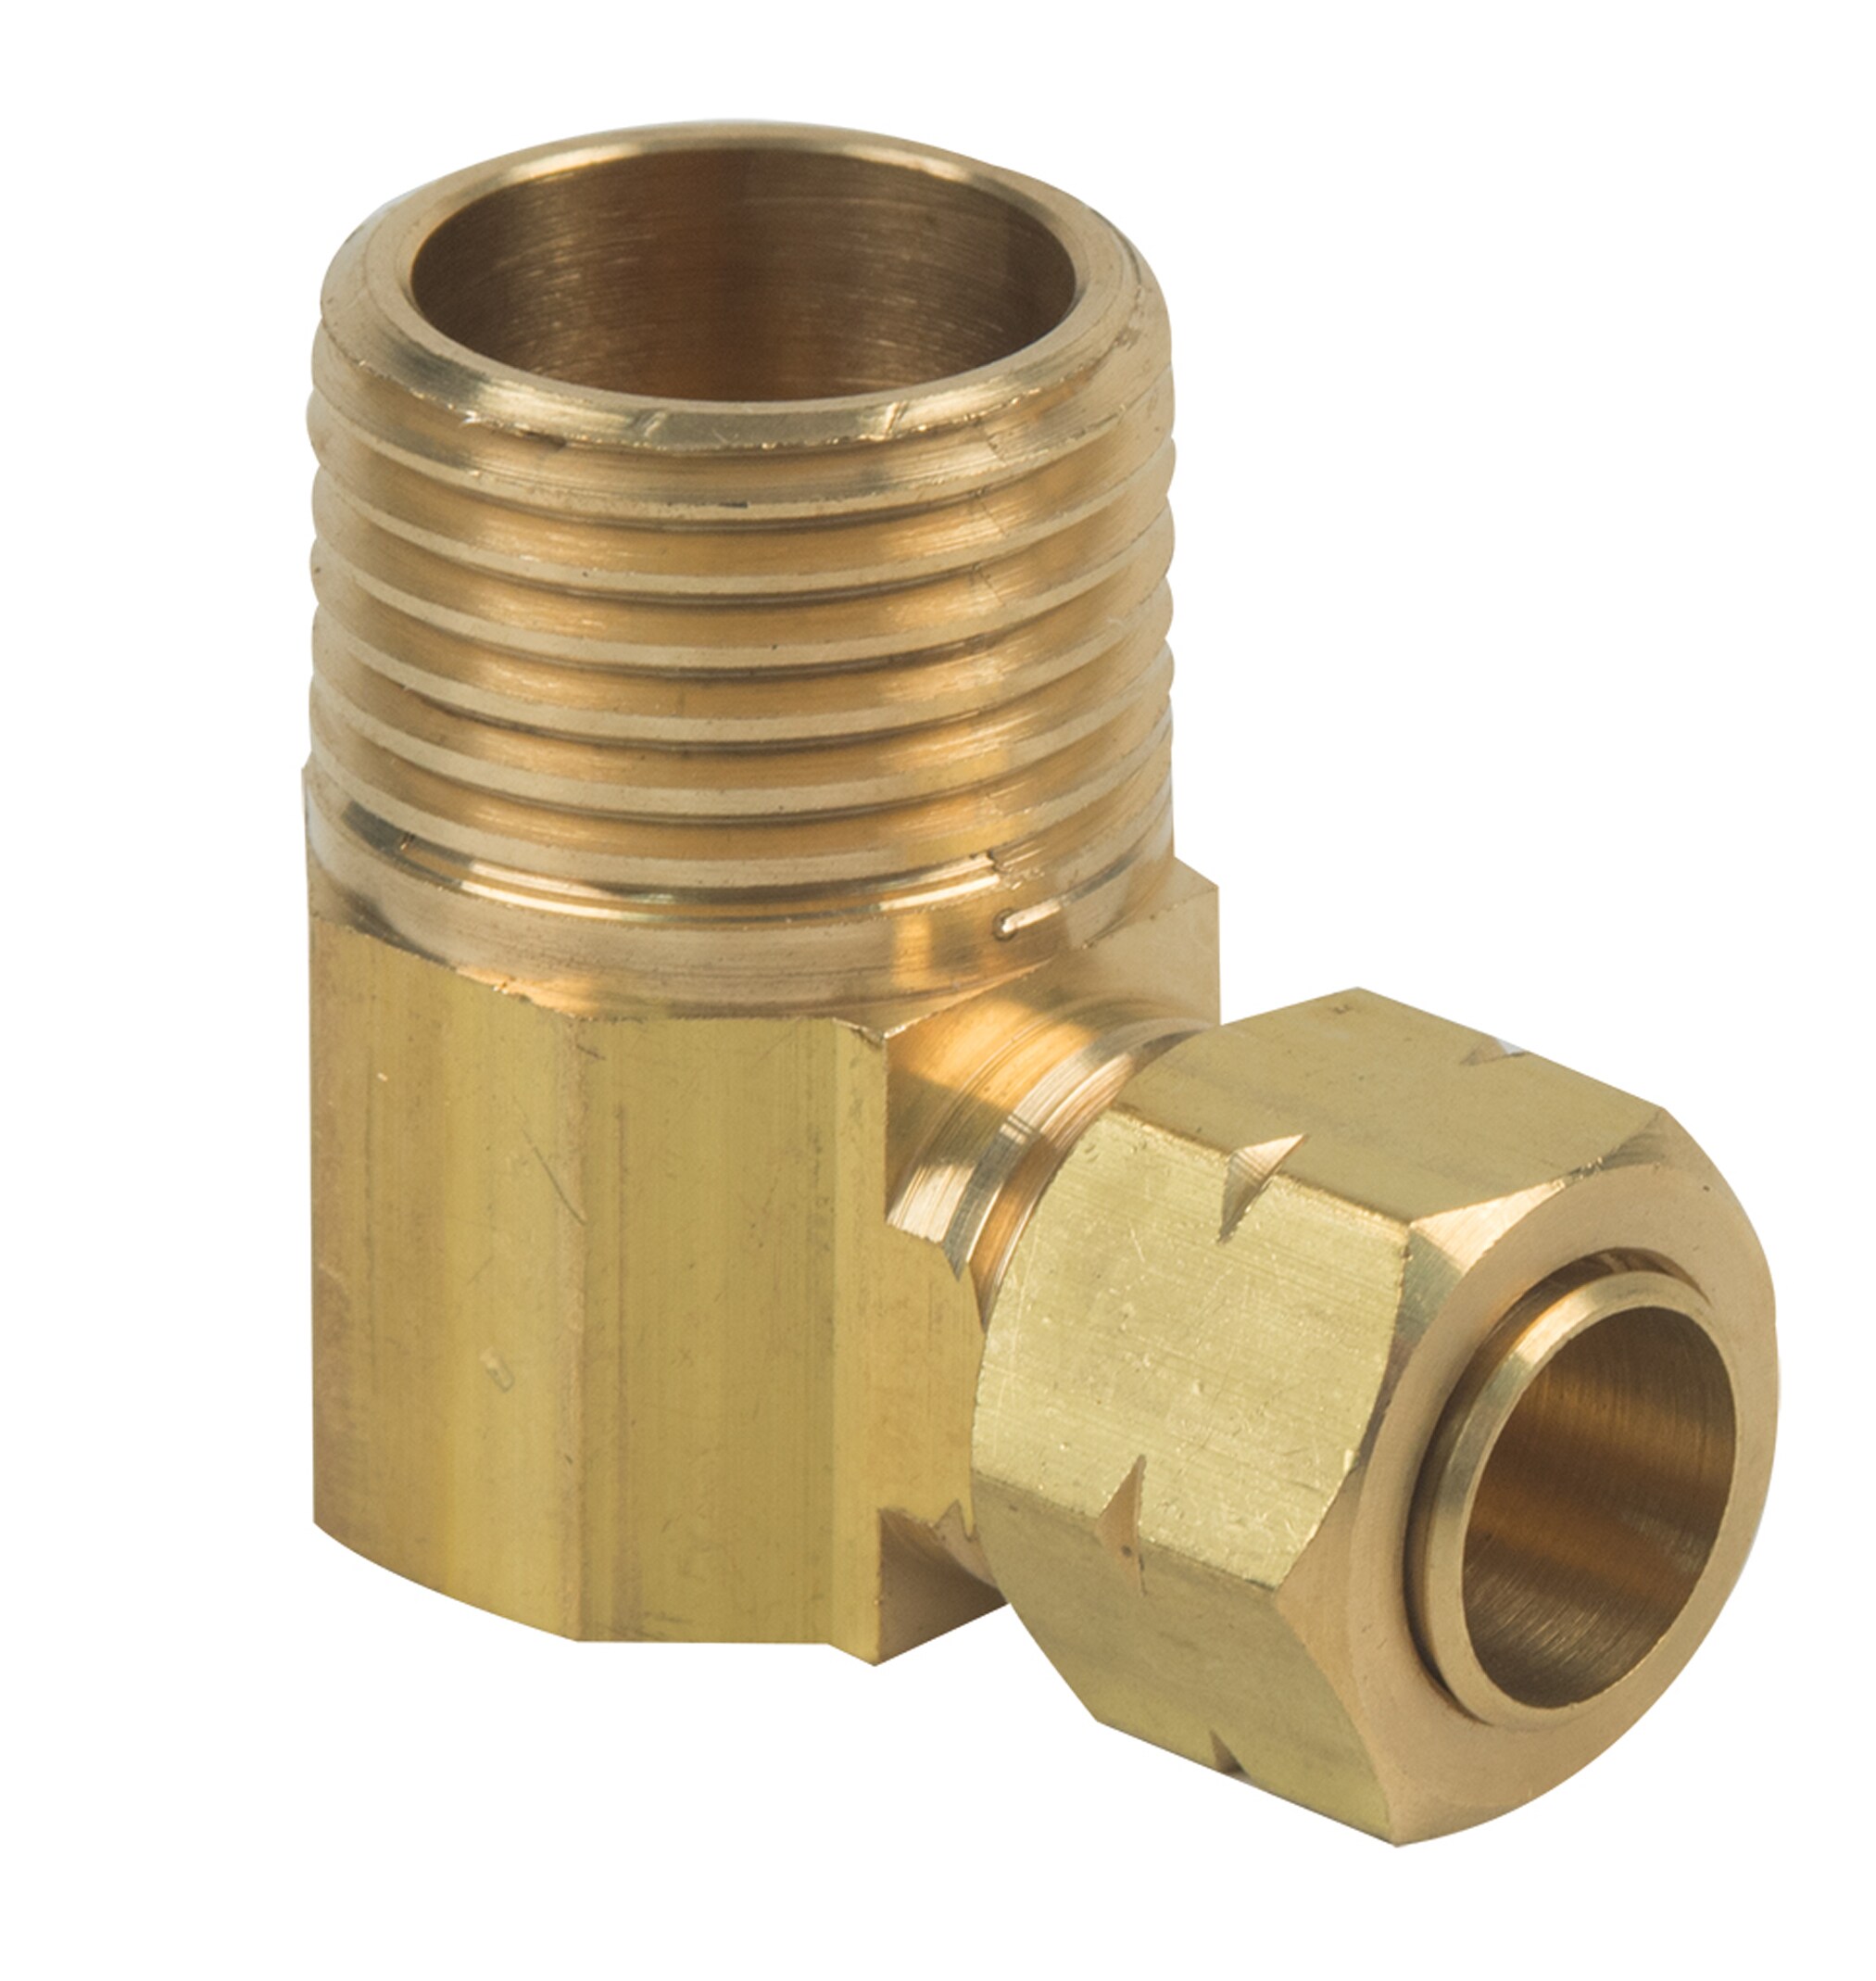 Details about   TUBEFIT BRASS ELBOW FEMALE MALE 3/8" BSP THREAD 025-06 x1 